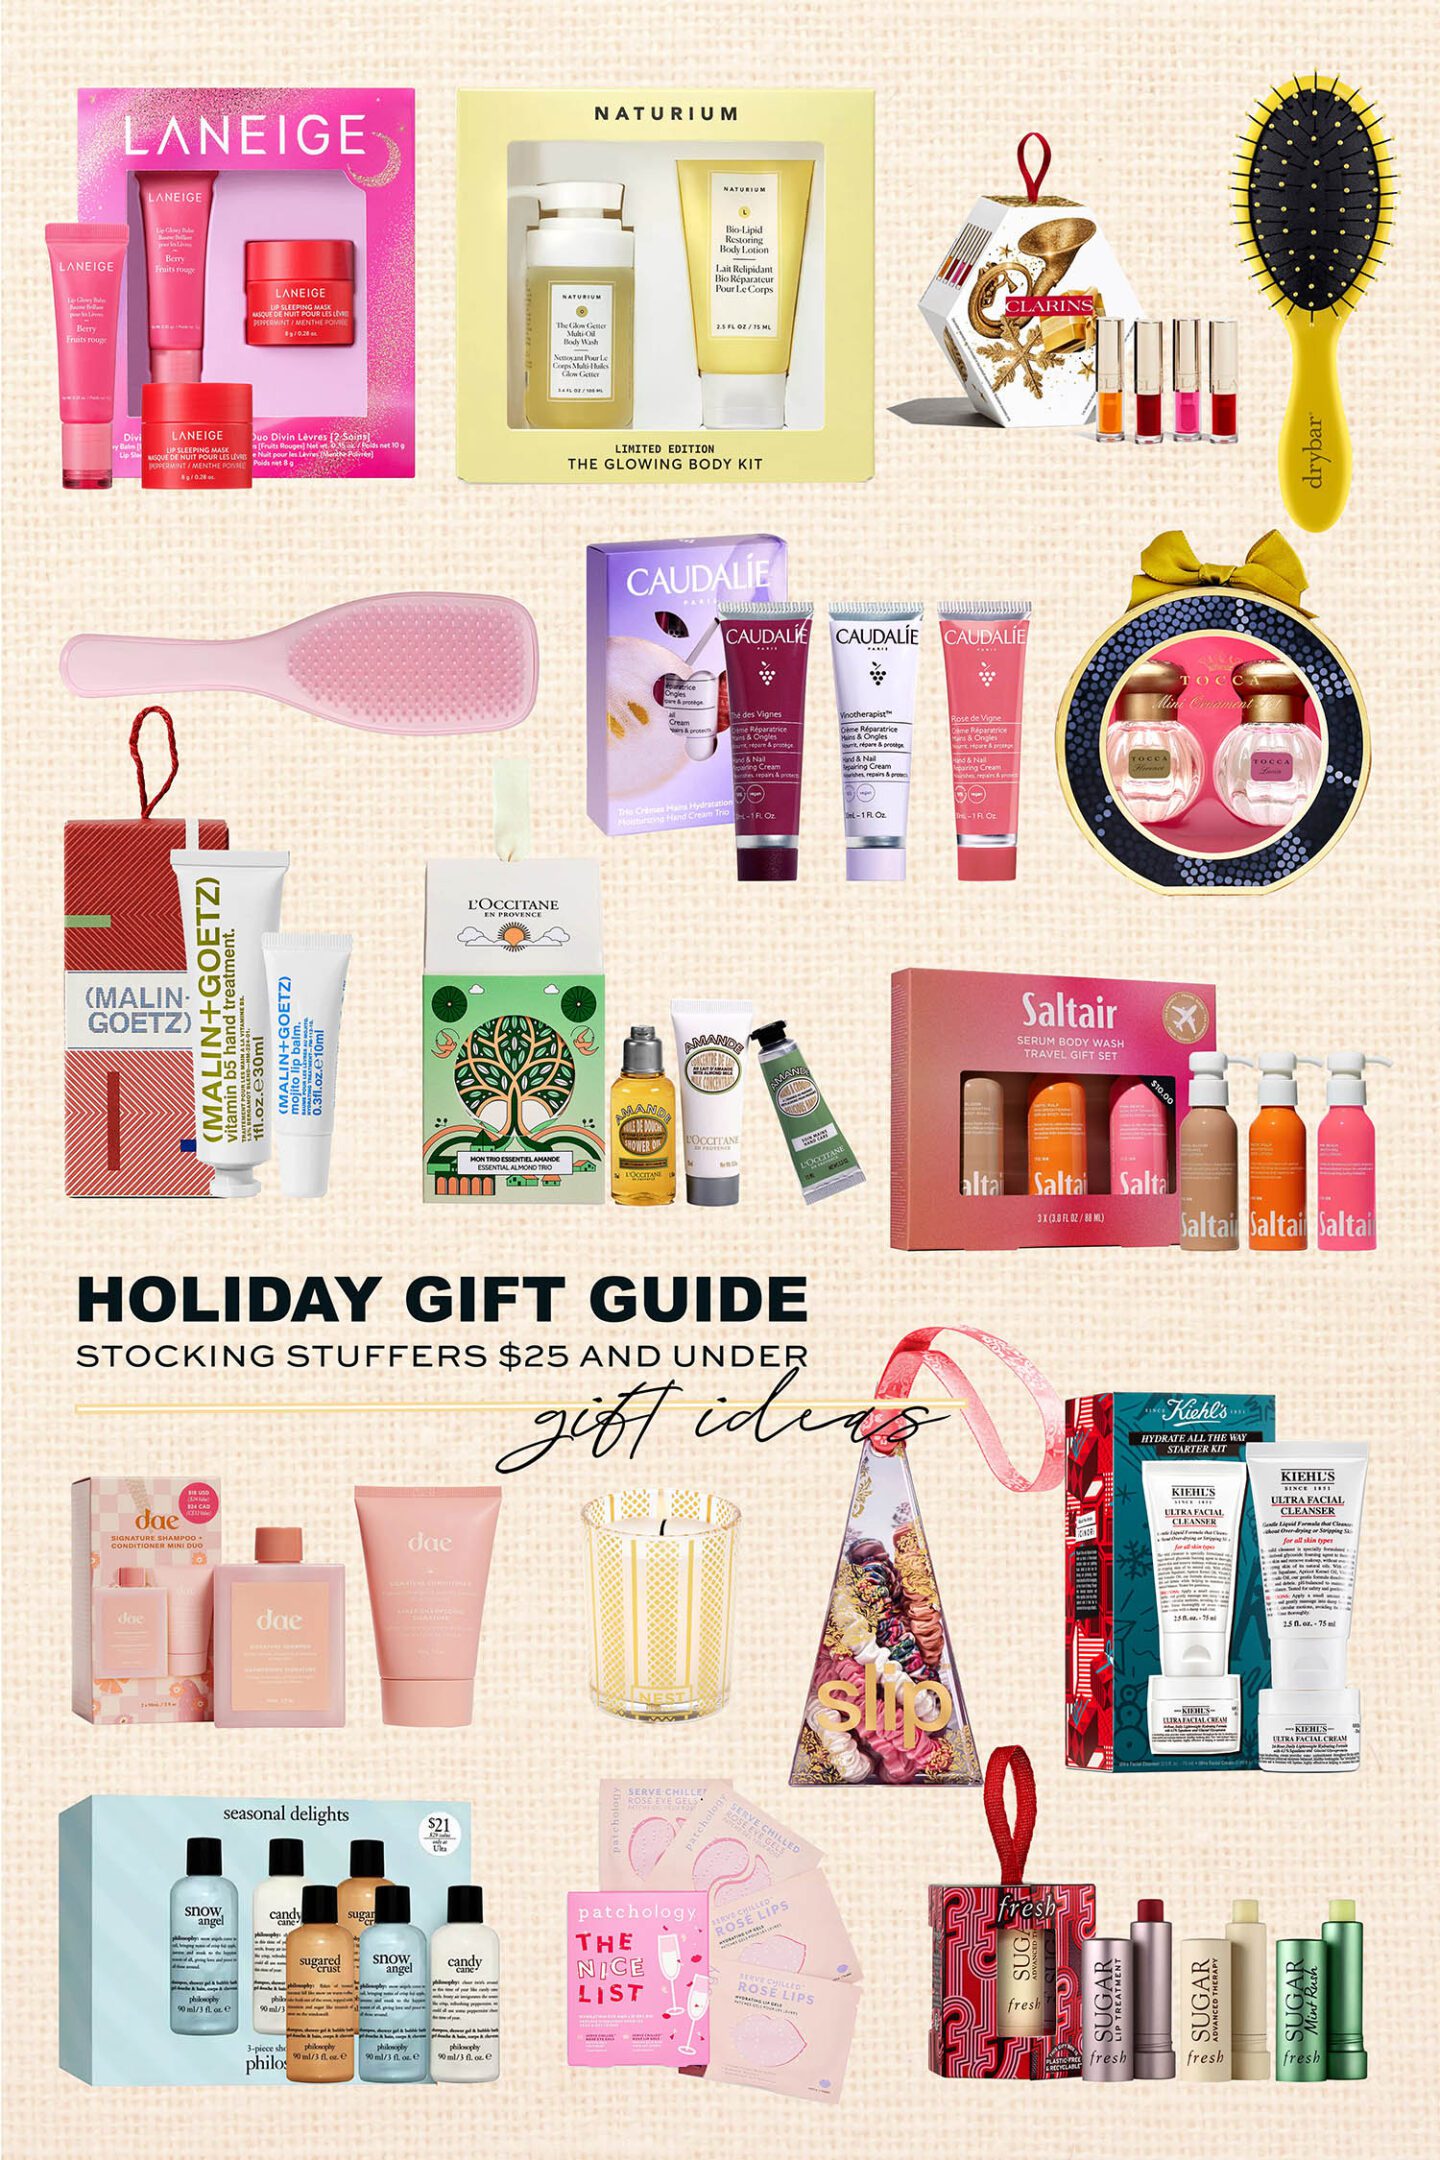 Skincare Hair Care Holiday Gift Ideas and Stocking Stuffers $25 and Under